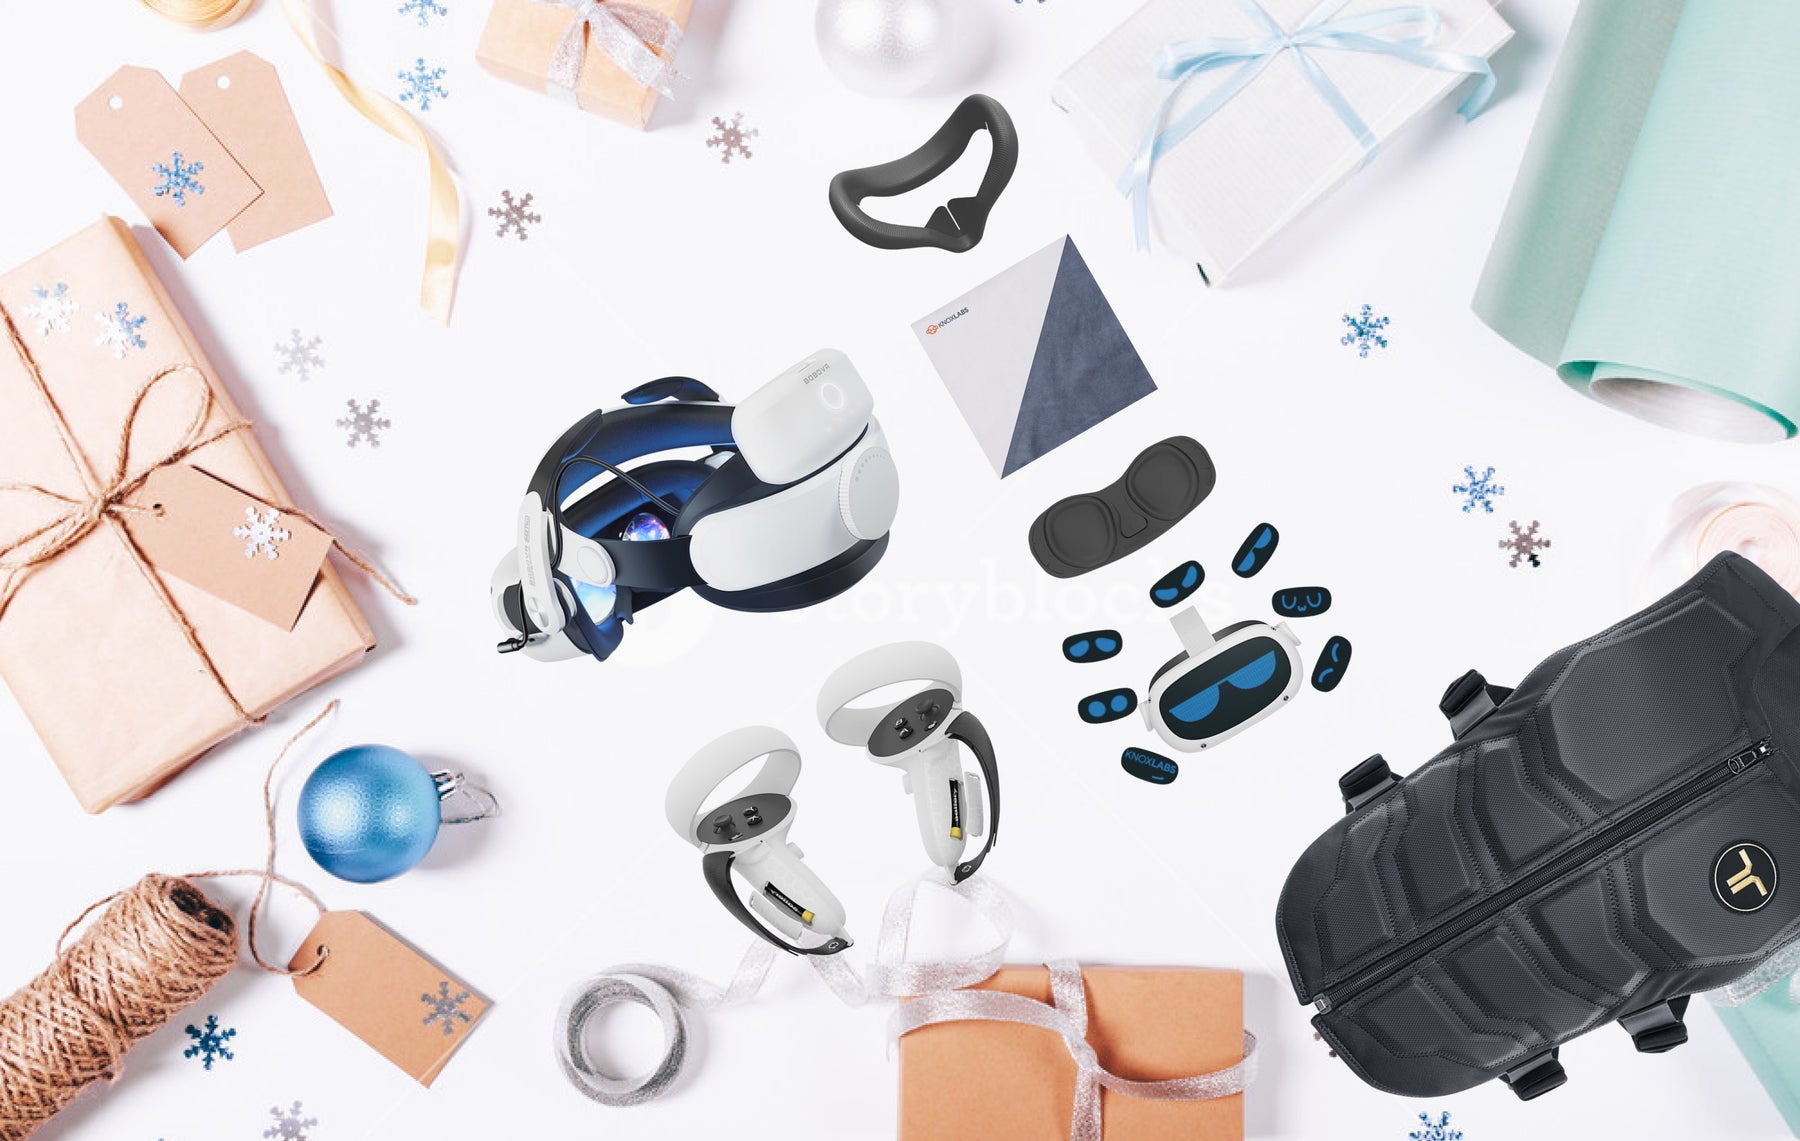 The Ultimate VR Holiday Gift Guide, Presented by Knoxlabs